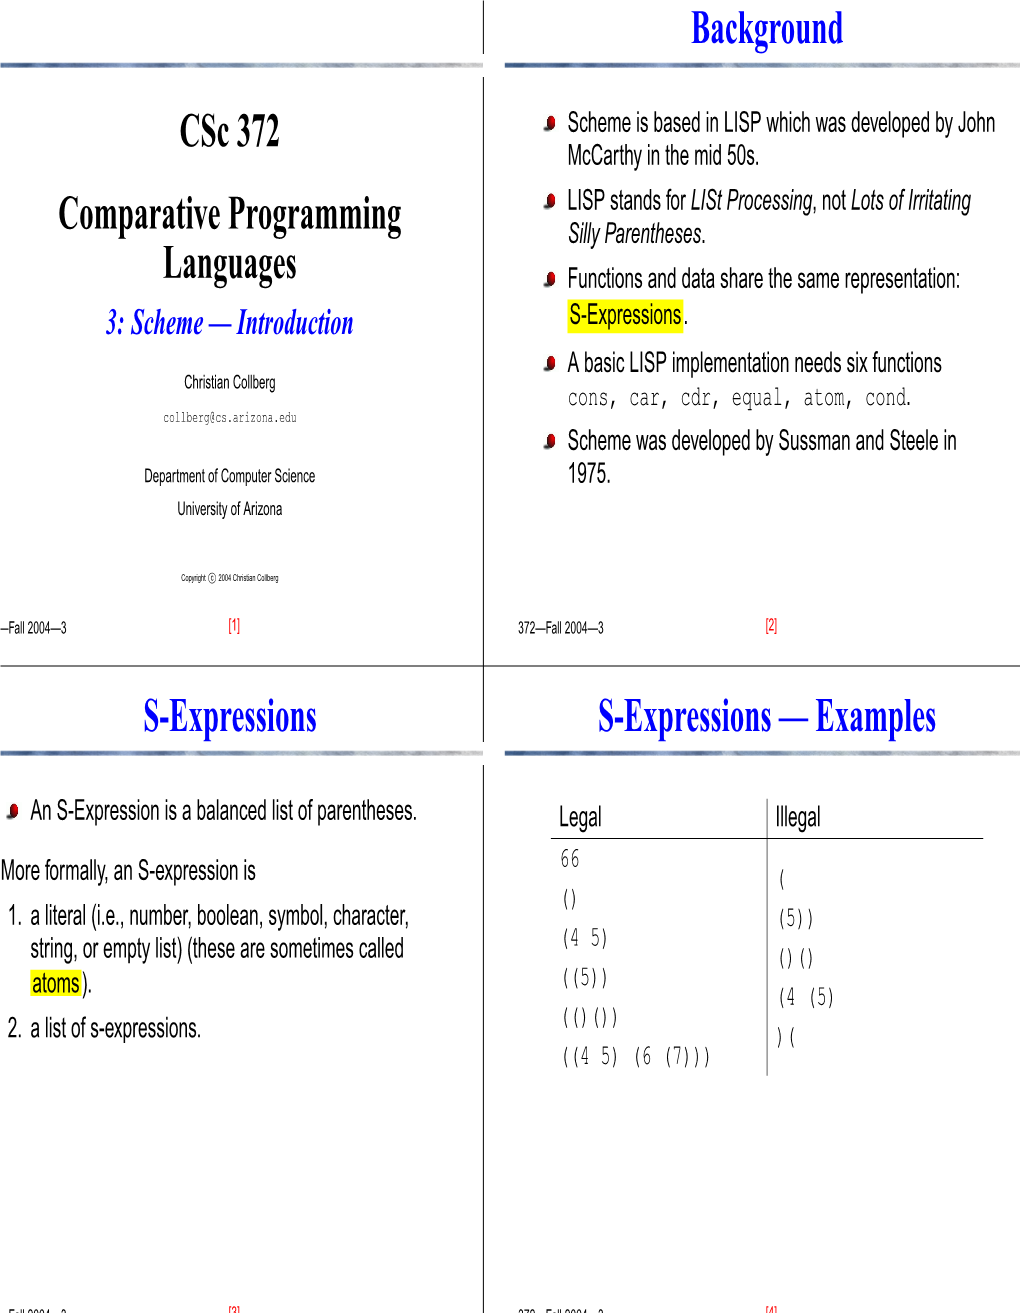 Csc 372 Comparative Programming Languages Background S-Expressions S-Expressions